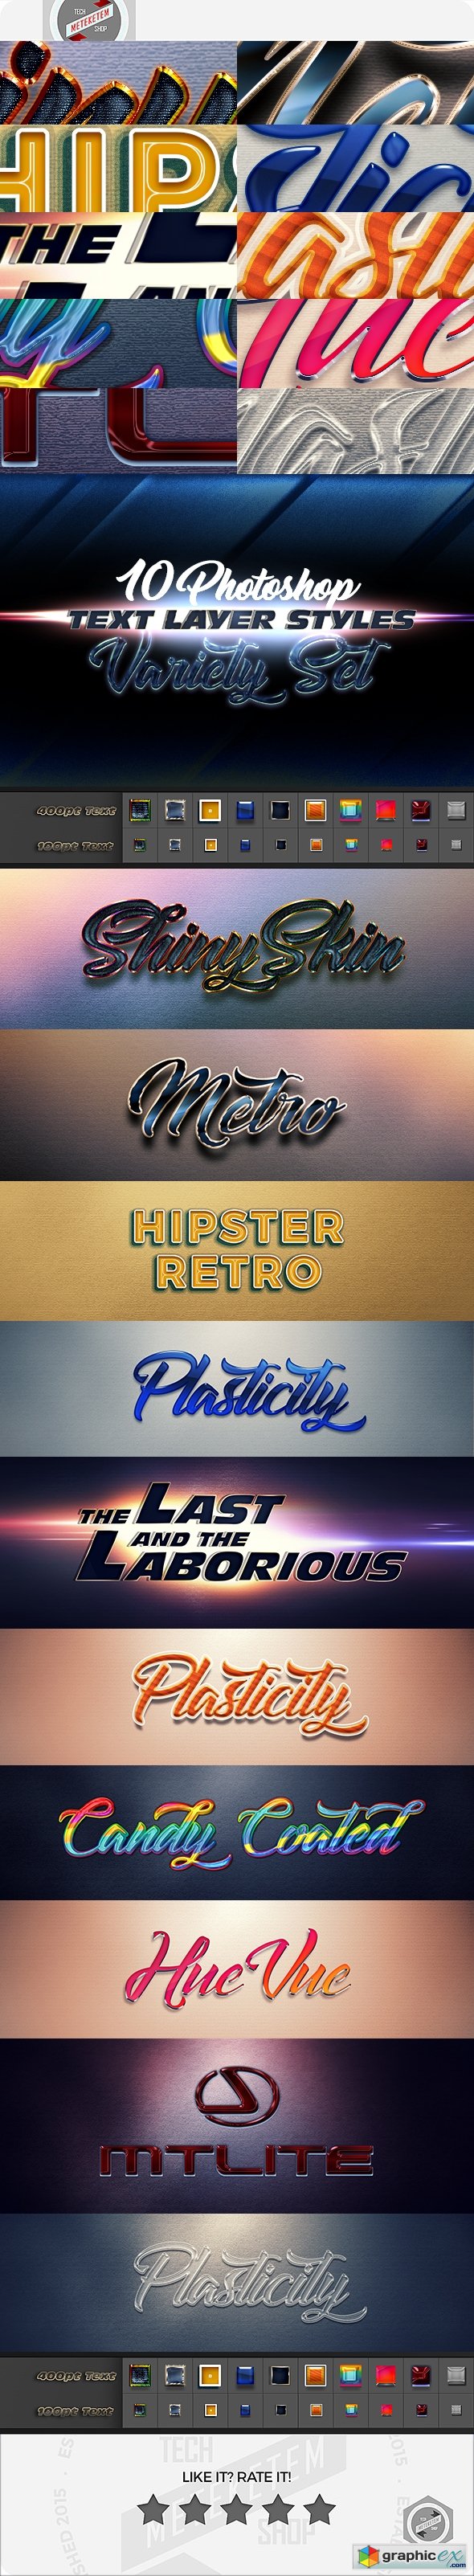 Text Layer Styles - Variety Pack 3